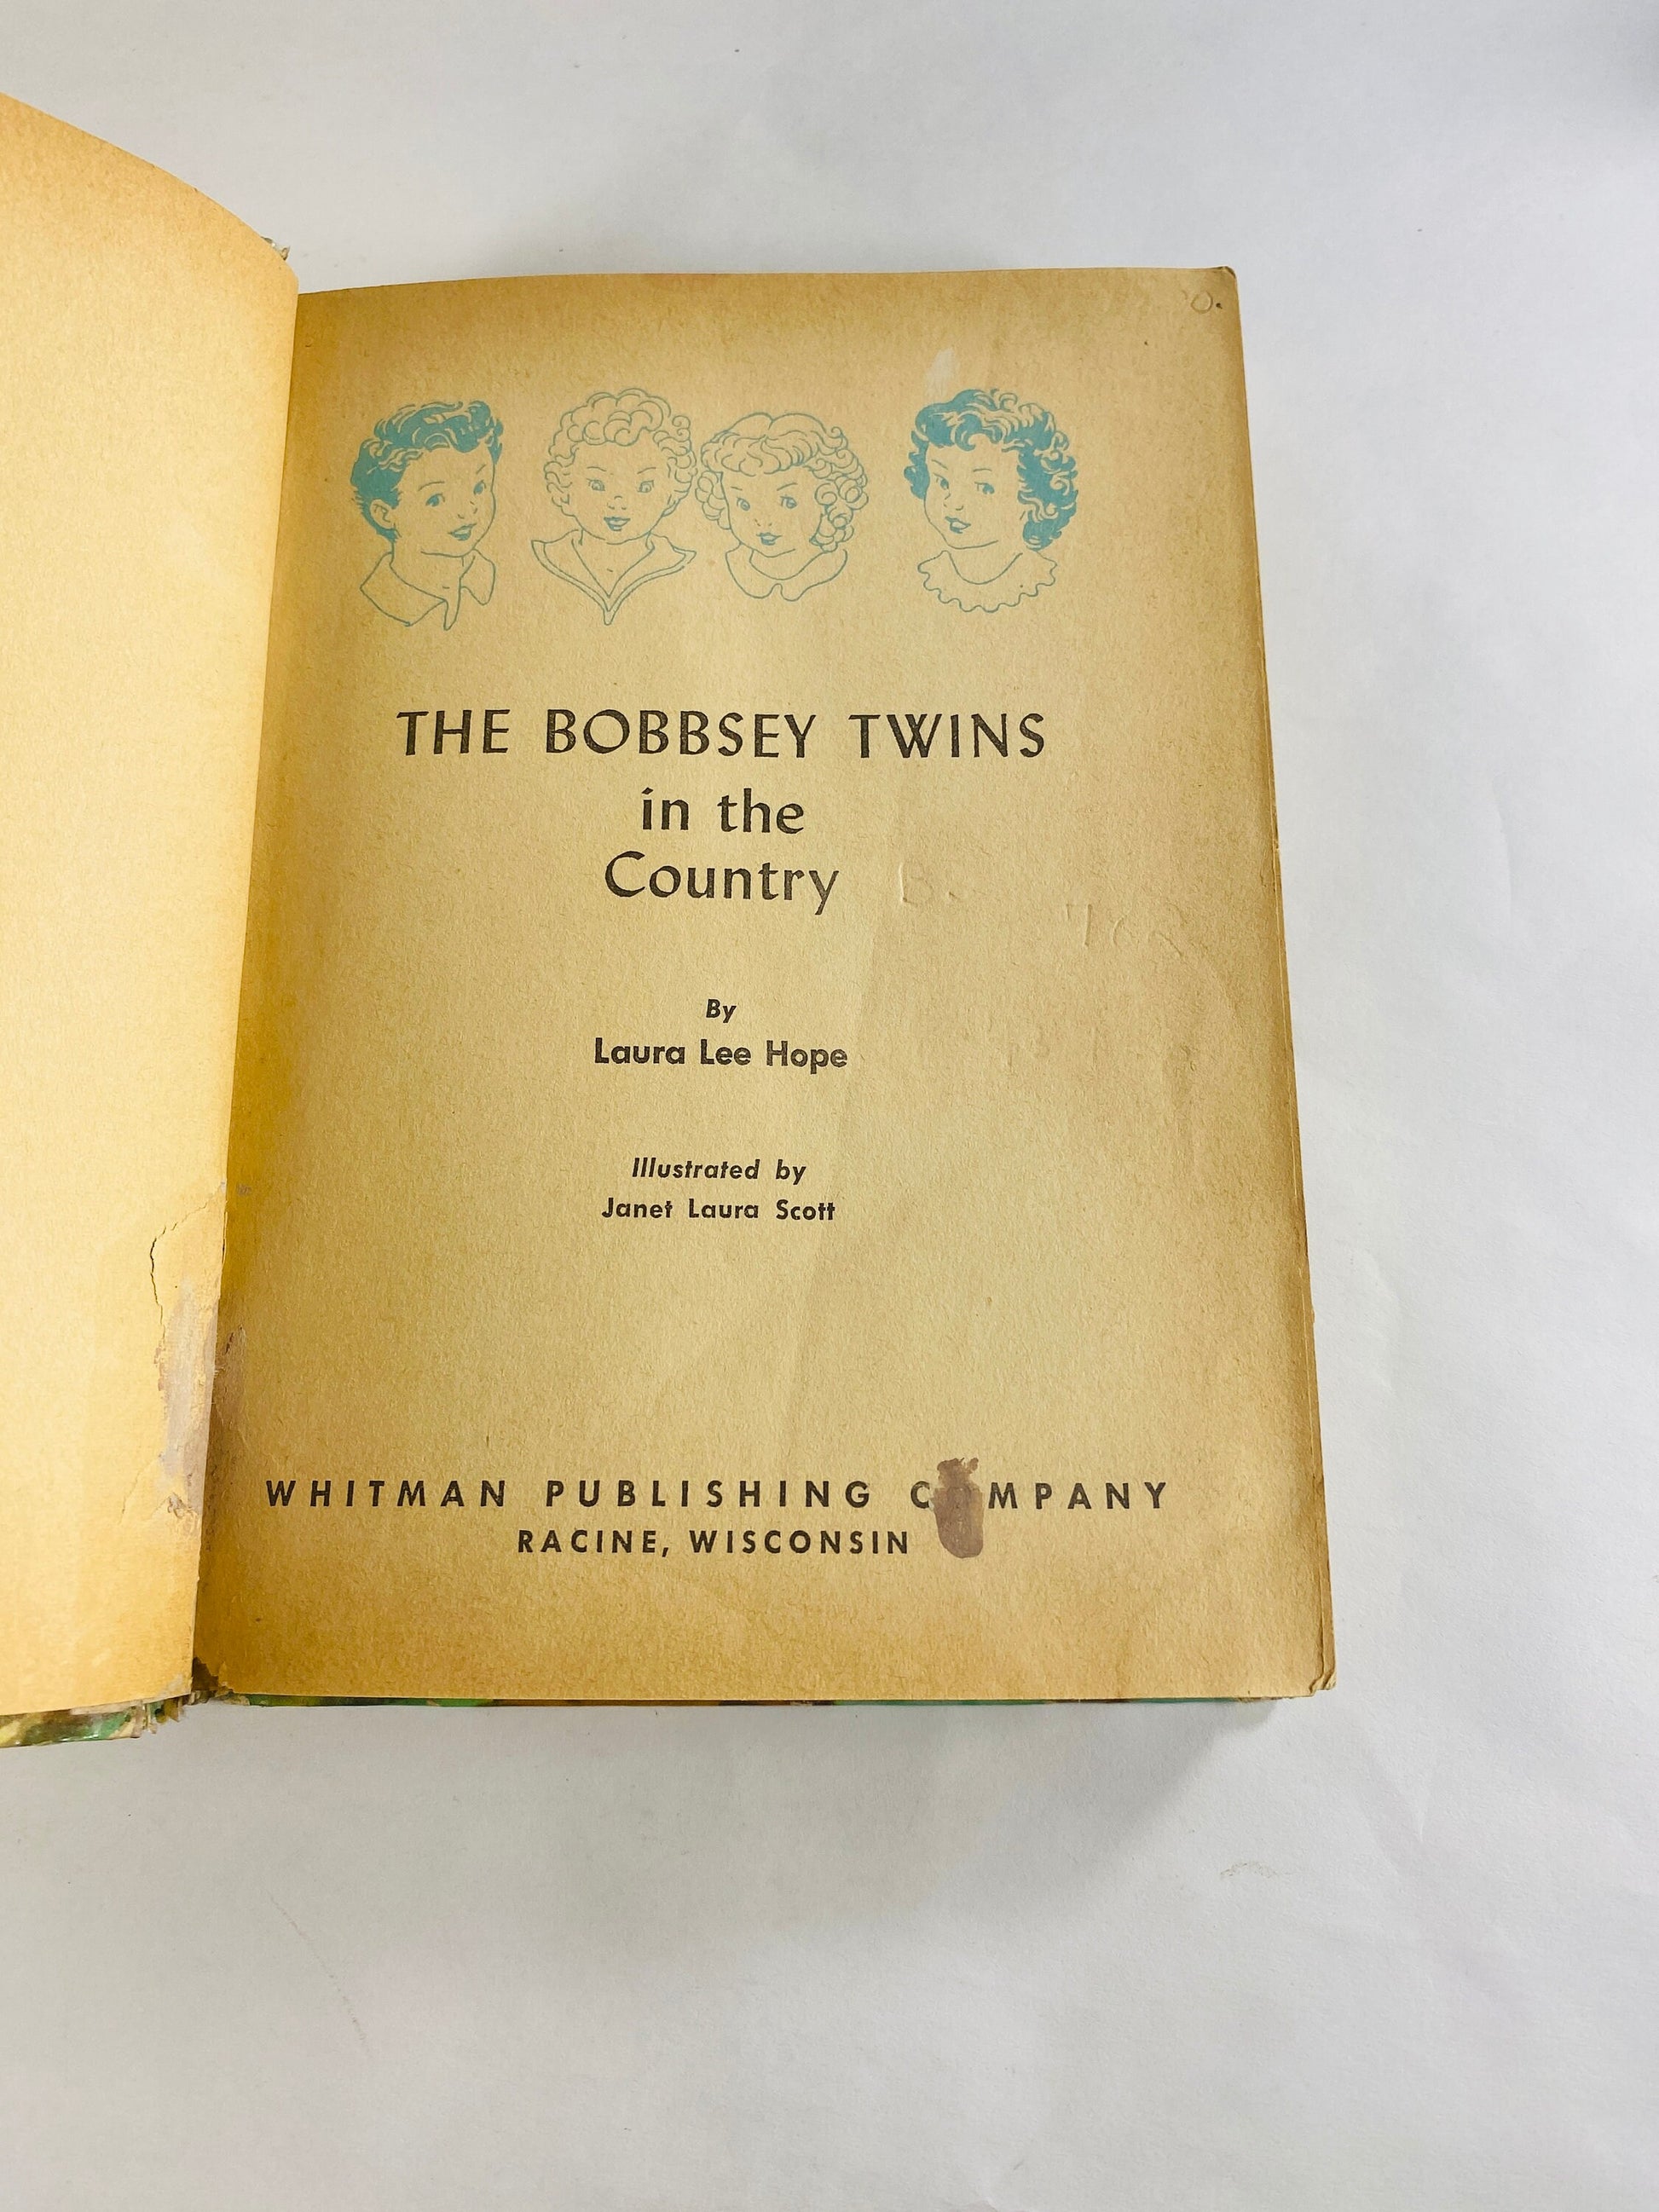 Bobbsey Twins in the Country Vintage Book circa 1953 by Laura Lee Hope. Whitman series Nancy Drew